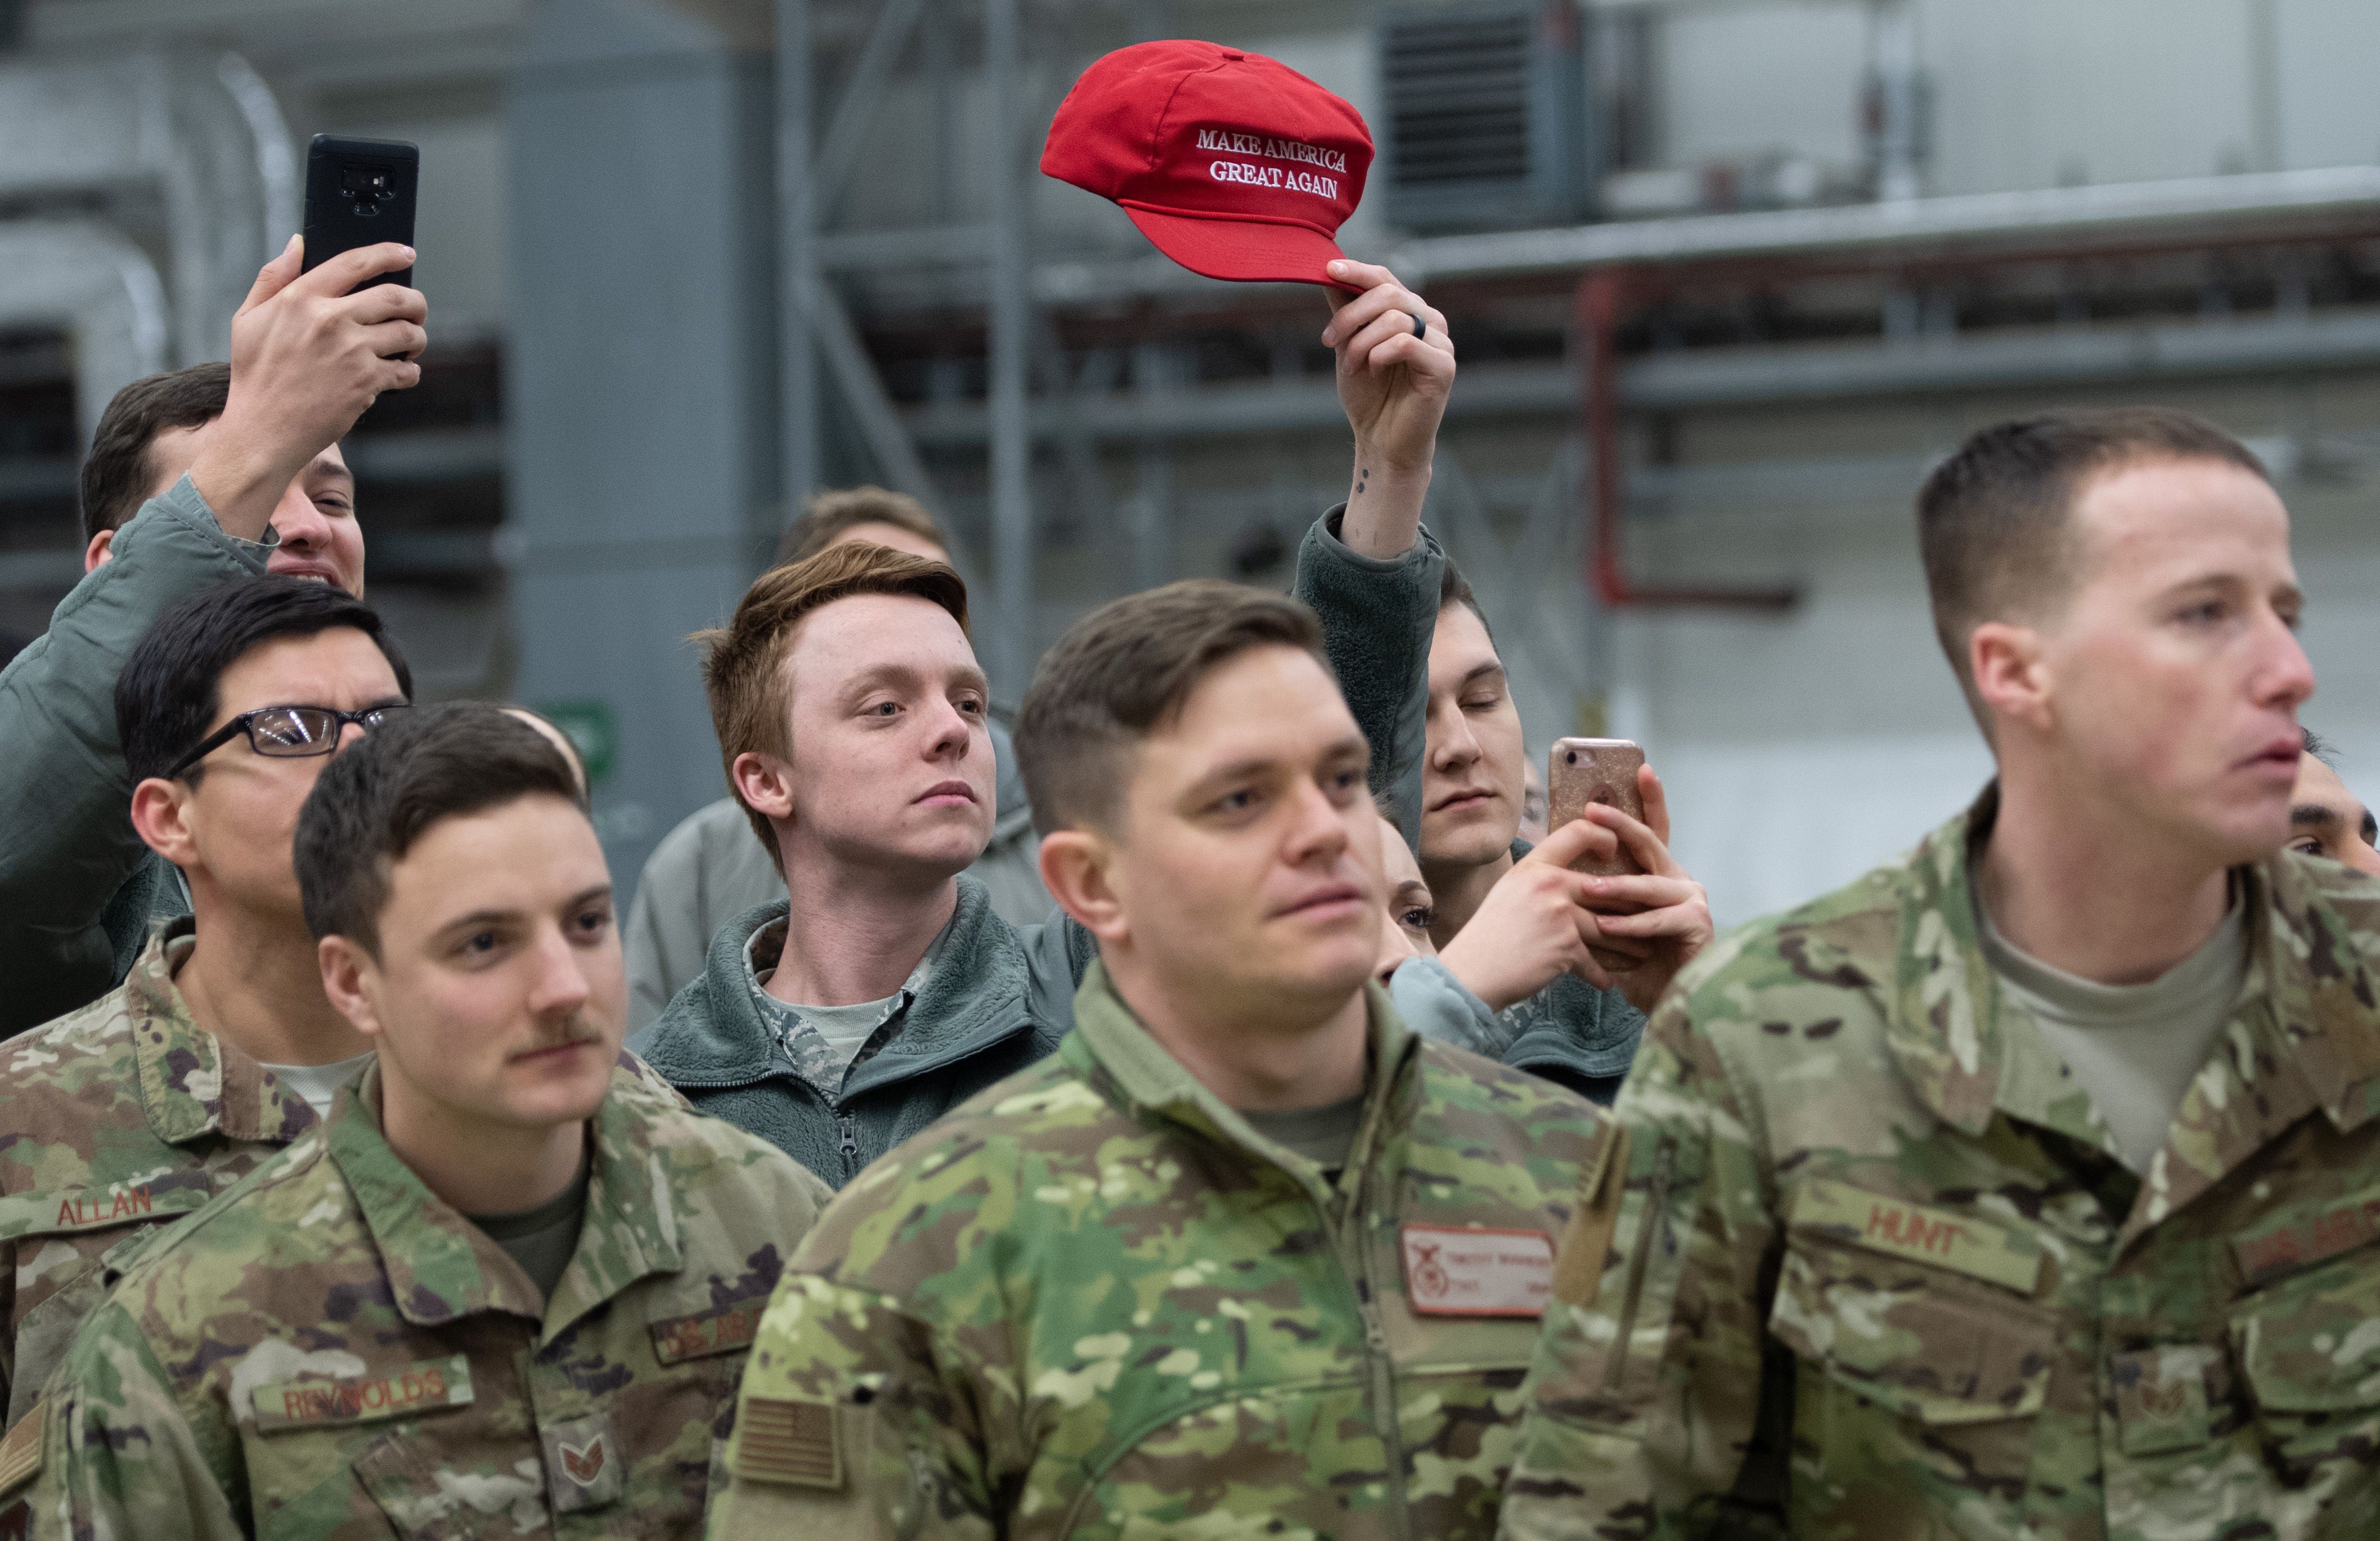 A member of the US military holds up a "Make America Great Again" hat as US President Donald Trump and First Lady Melania Trump greet members of the US military during a stop at Ramstein Air Base in Germany, on December 27, 2018. - President Donald Trump used a lightning visit to Iraq -- his first with US troops in a conflict zone since being elected -- to defend the withdrawal from Syria and to declare an end to America's role as the global "policeman." (Photo by SAUL LOEB/AFP/Getty Images)